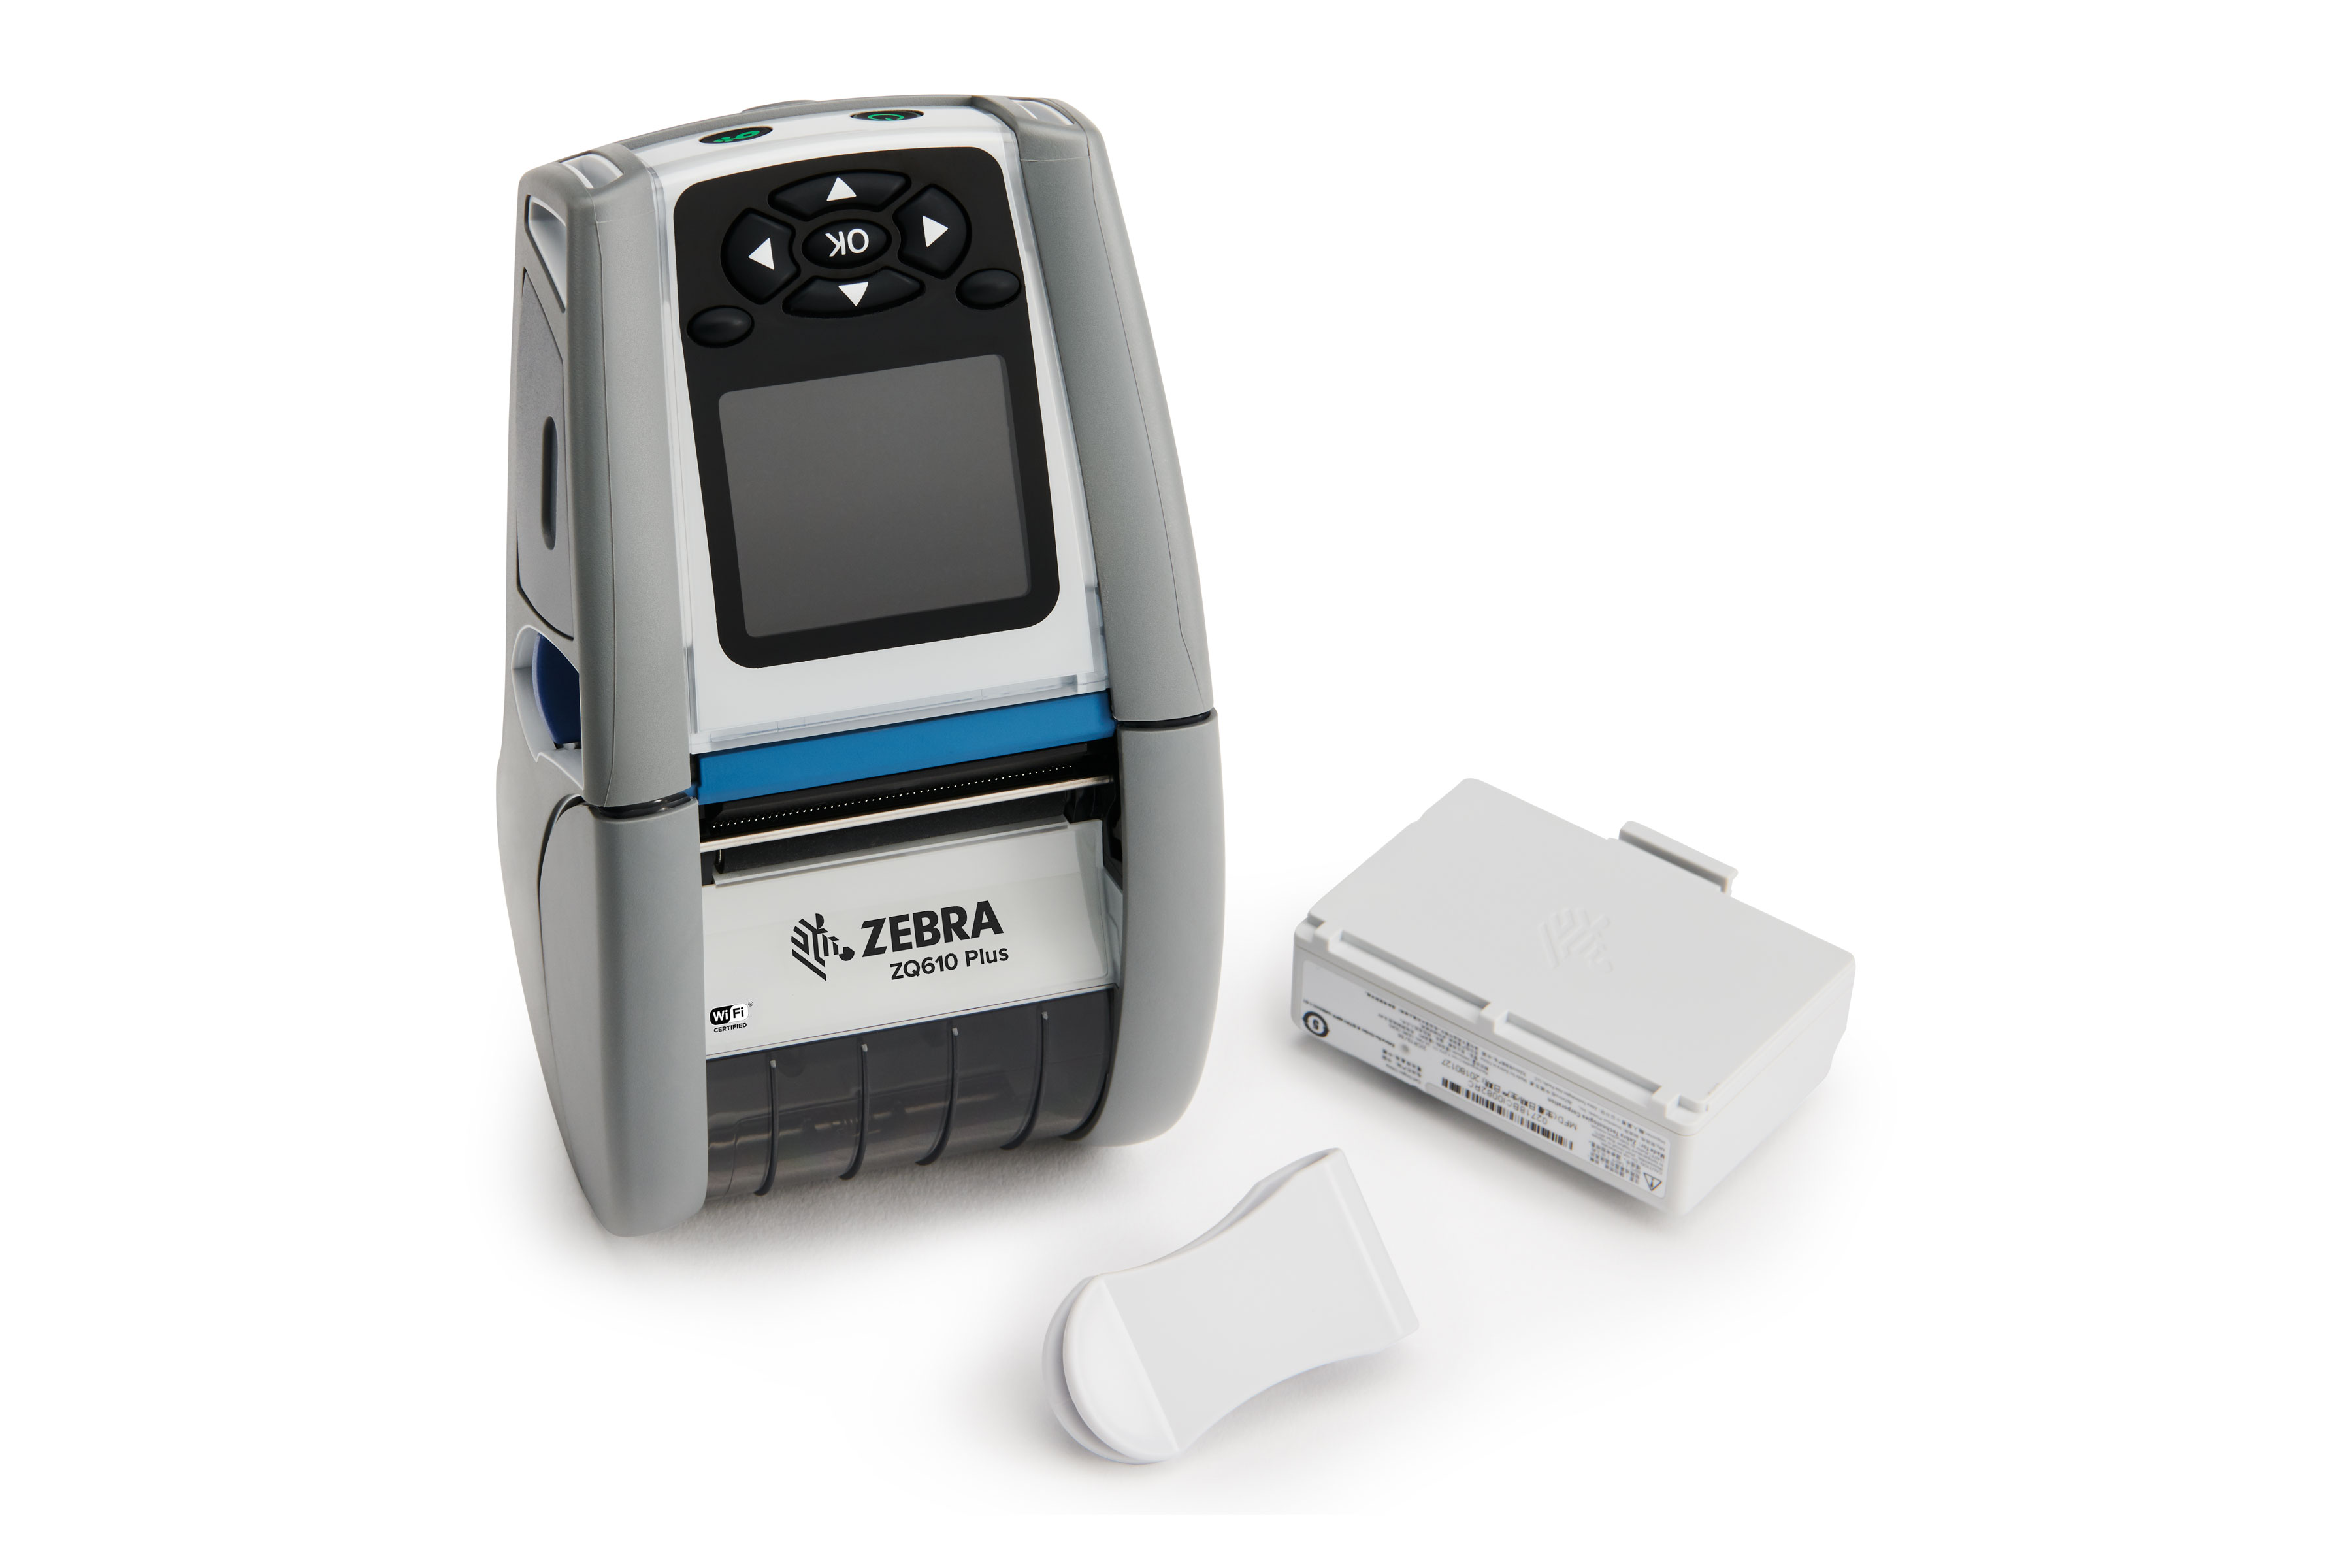 The History Of Thermal Printers